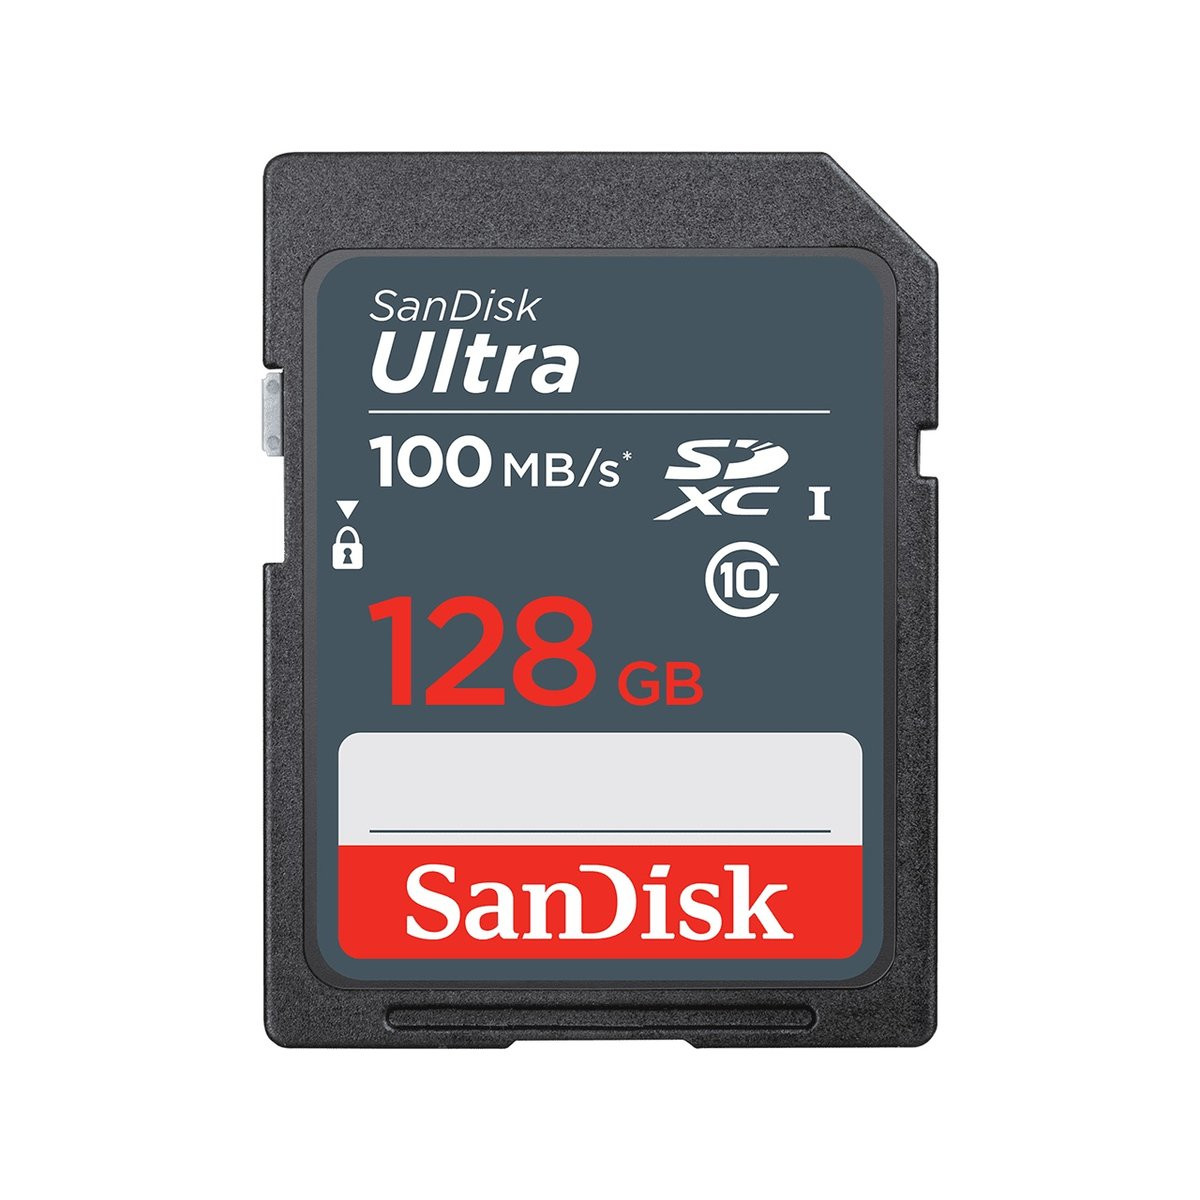 SDHC (UHS-1) SanDisk Ultra 128Gb class 10 (100Mb/s) - 1